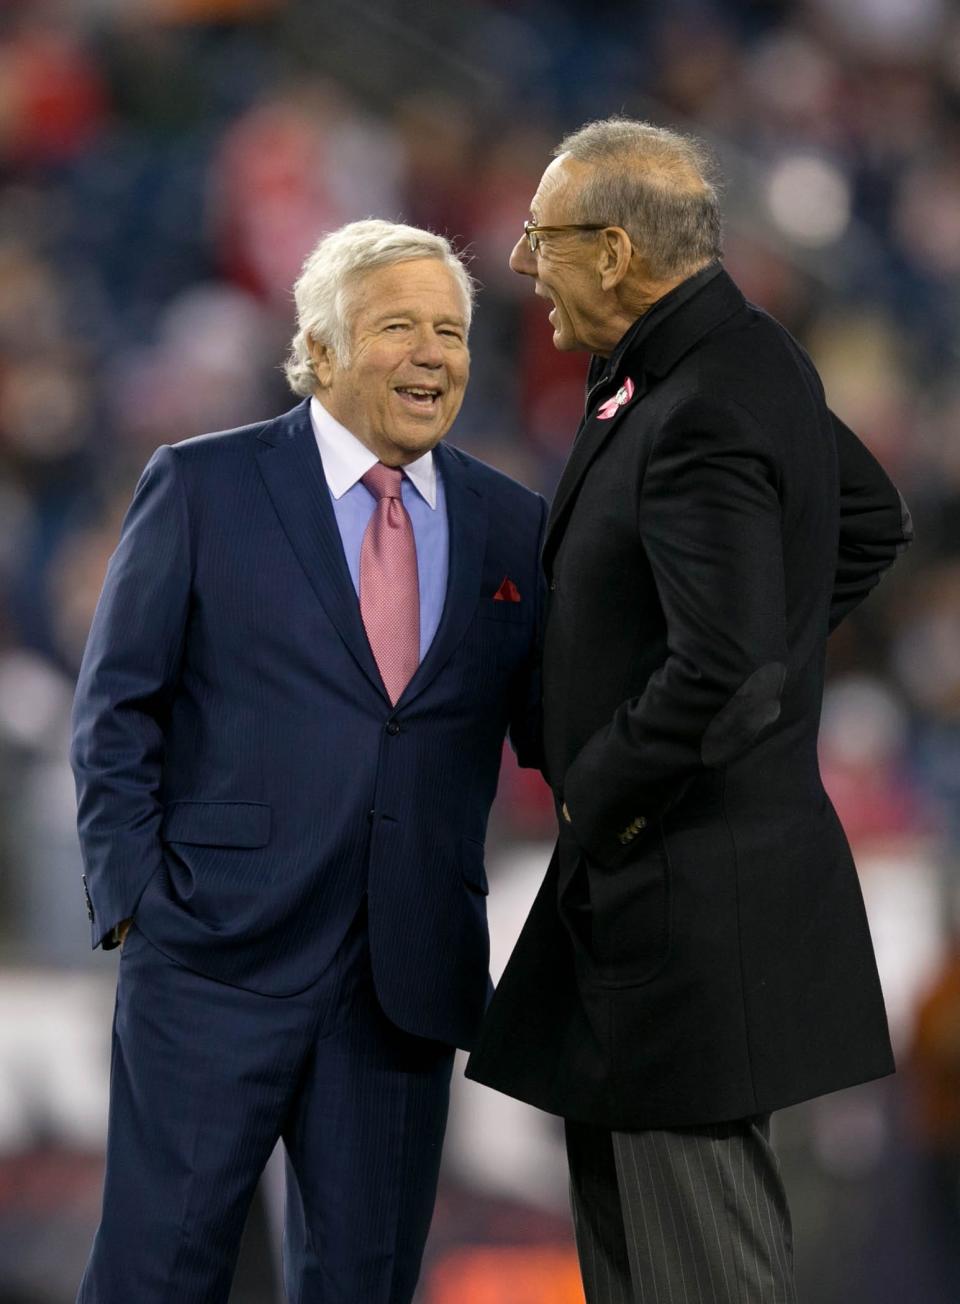 New England Patriots owner Robert Kraft, left, and Miami Dolphins owner Stephen Ross, right, both Palm Beach residents, made the most recent Forbes list of the 400 richest Americans.